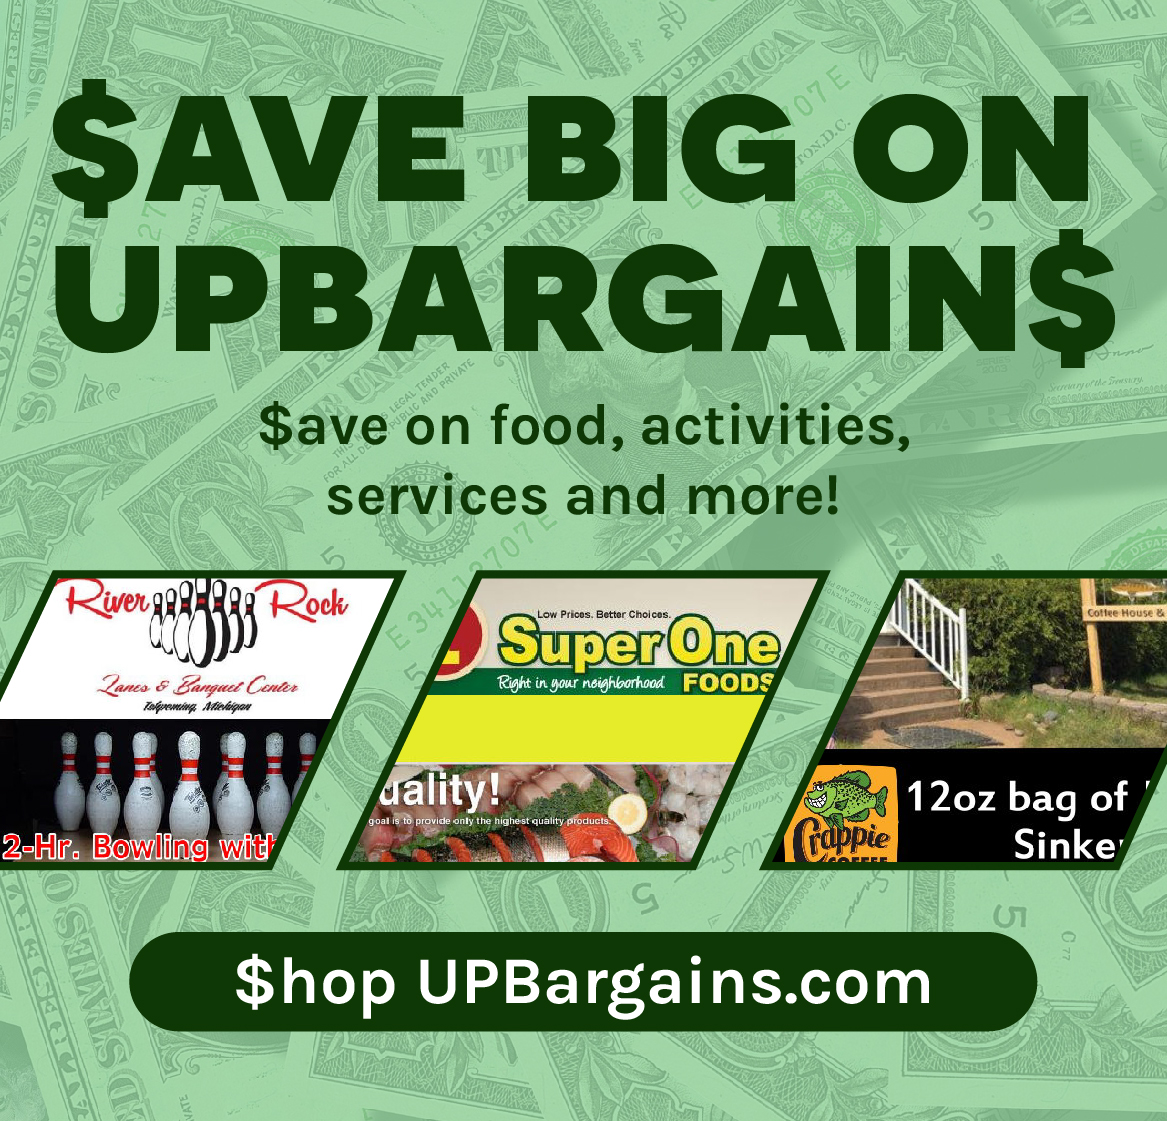 Save with UPBargains